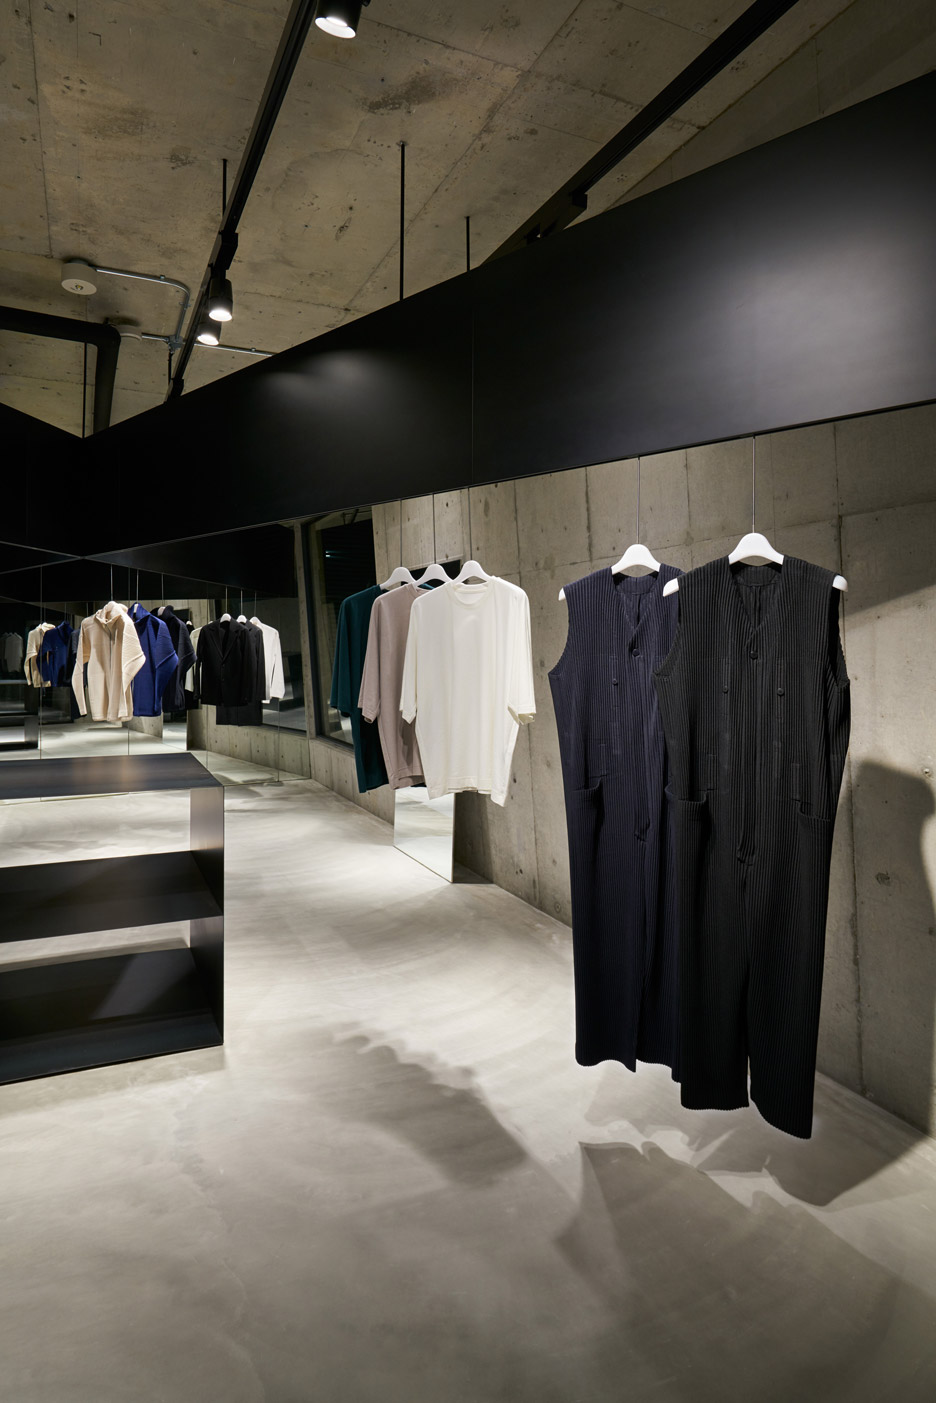 issey miyake homme plisse store by naoto fukasawa transforms a concrete building in Japan